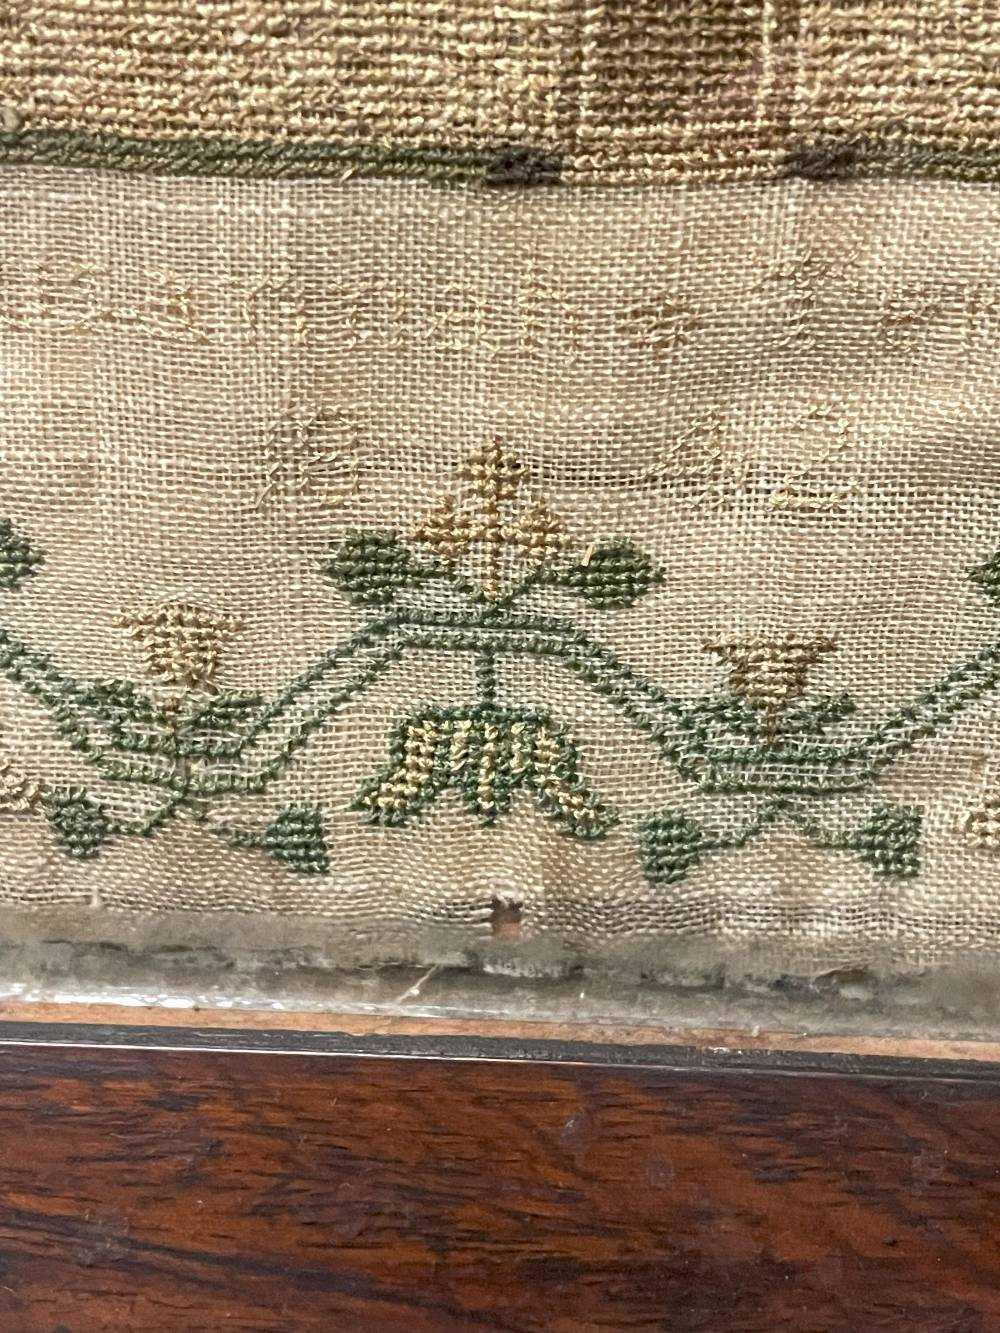 EARLY VICTORIAN NEEDLEWORK SAMPLER, by Susannah Terrington aged 10, dated 1842, decorated with - Image 9 of 15